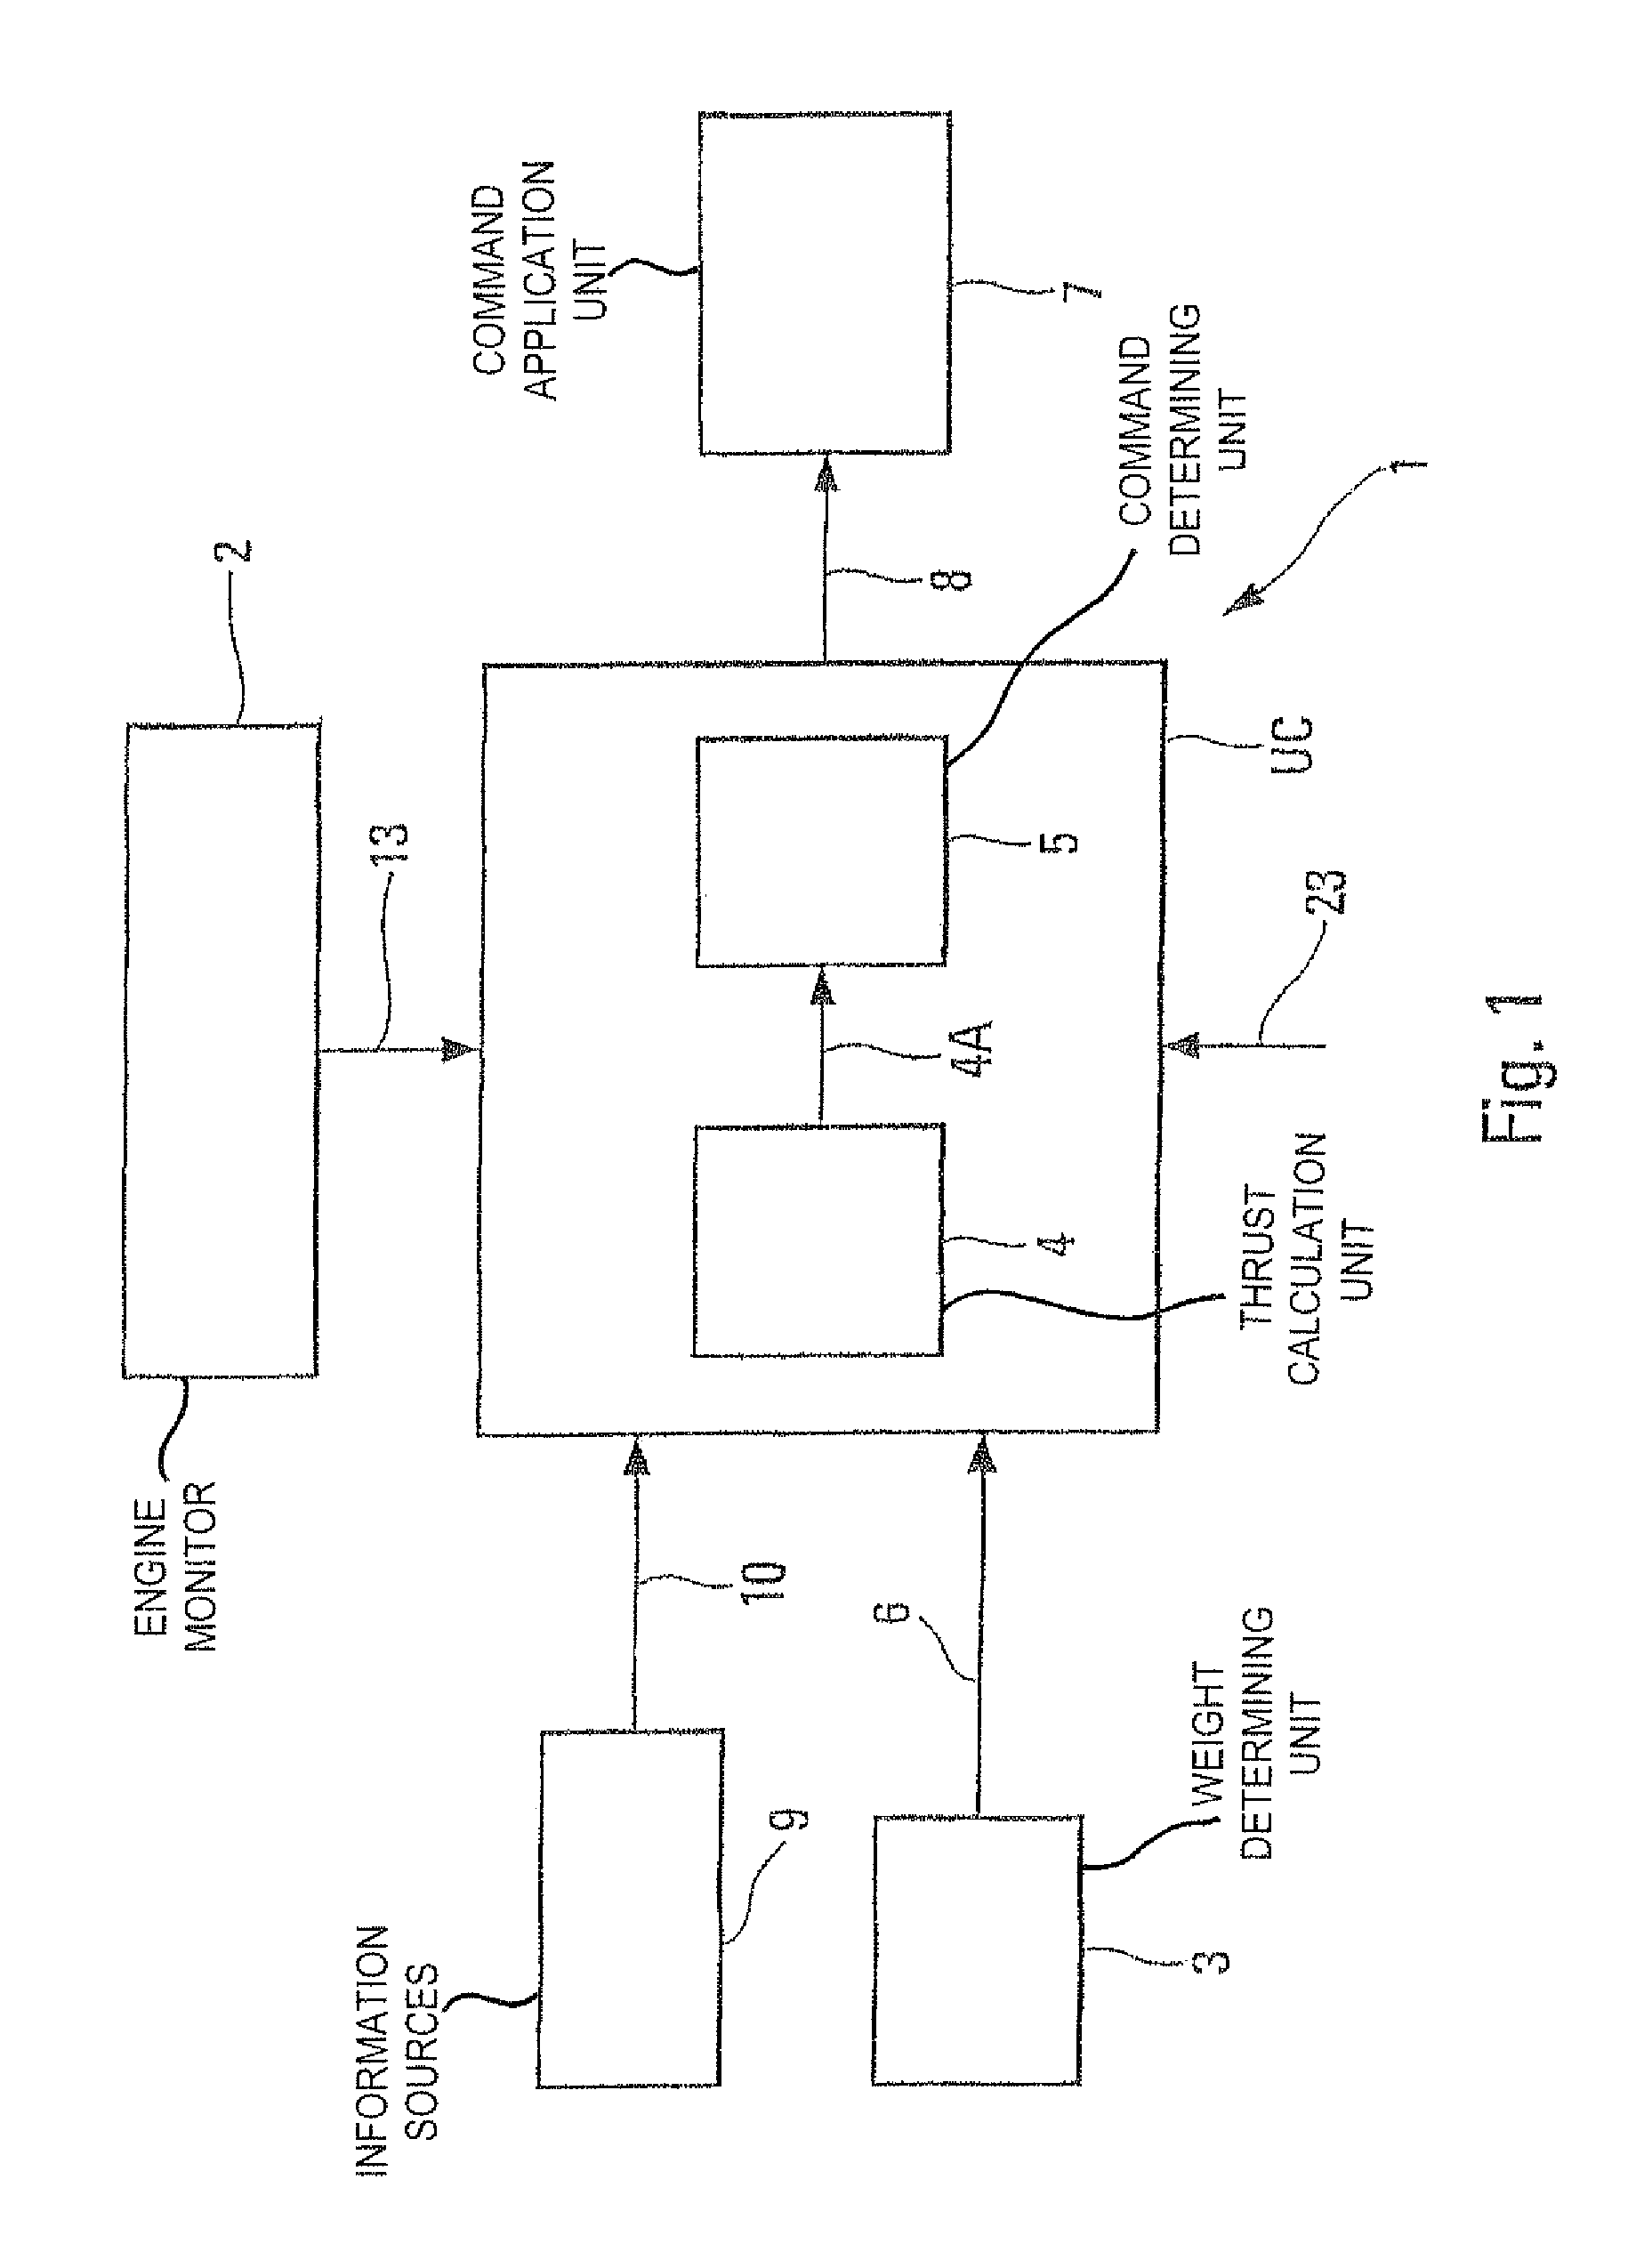 Method and device for controlling the thrust of a multi-engine aircraft